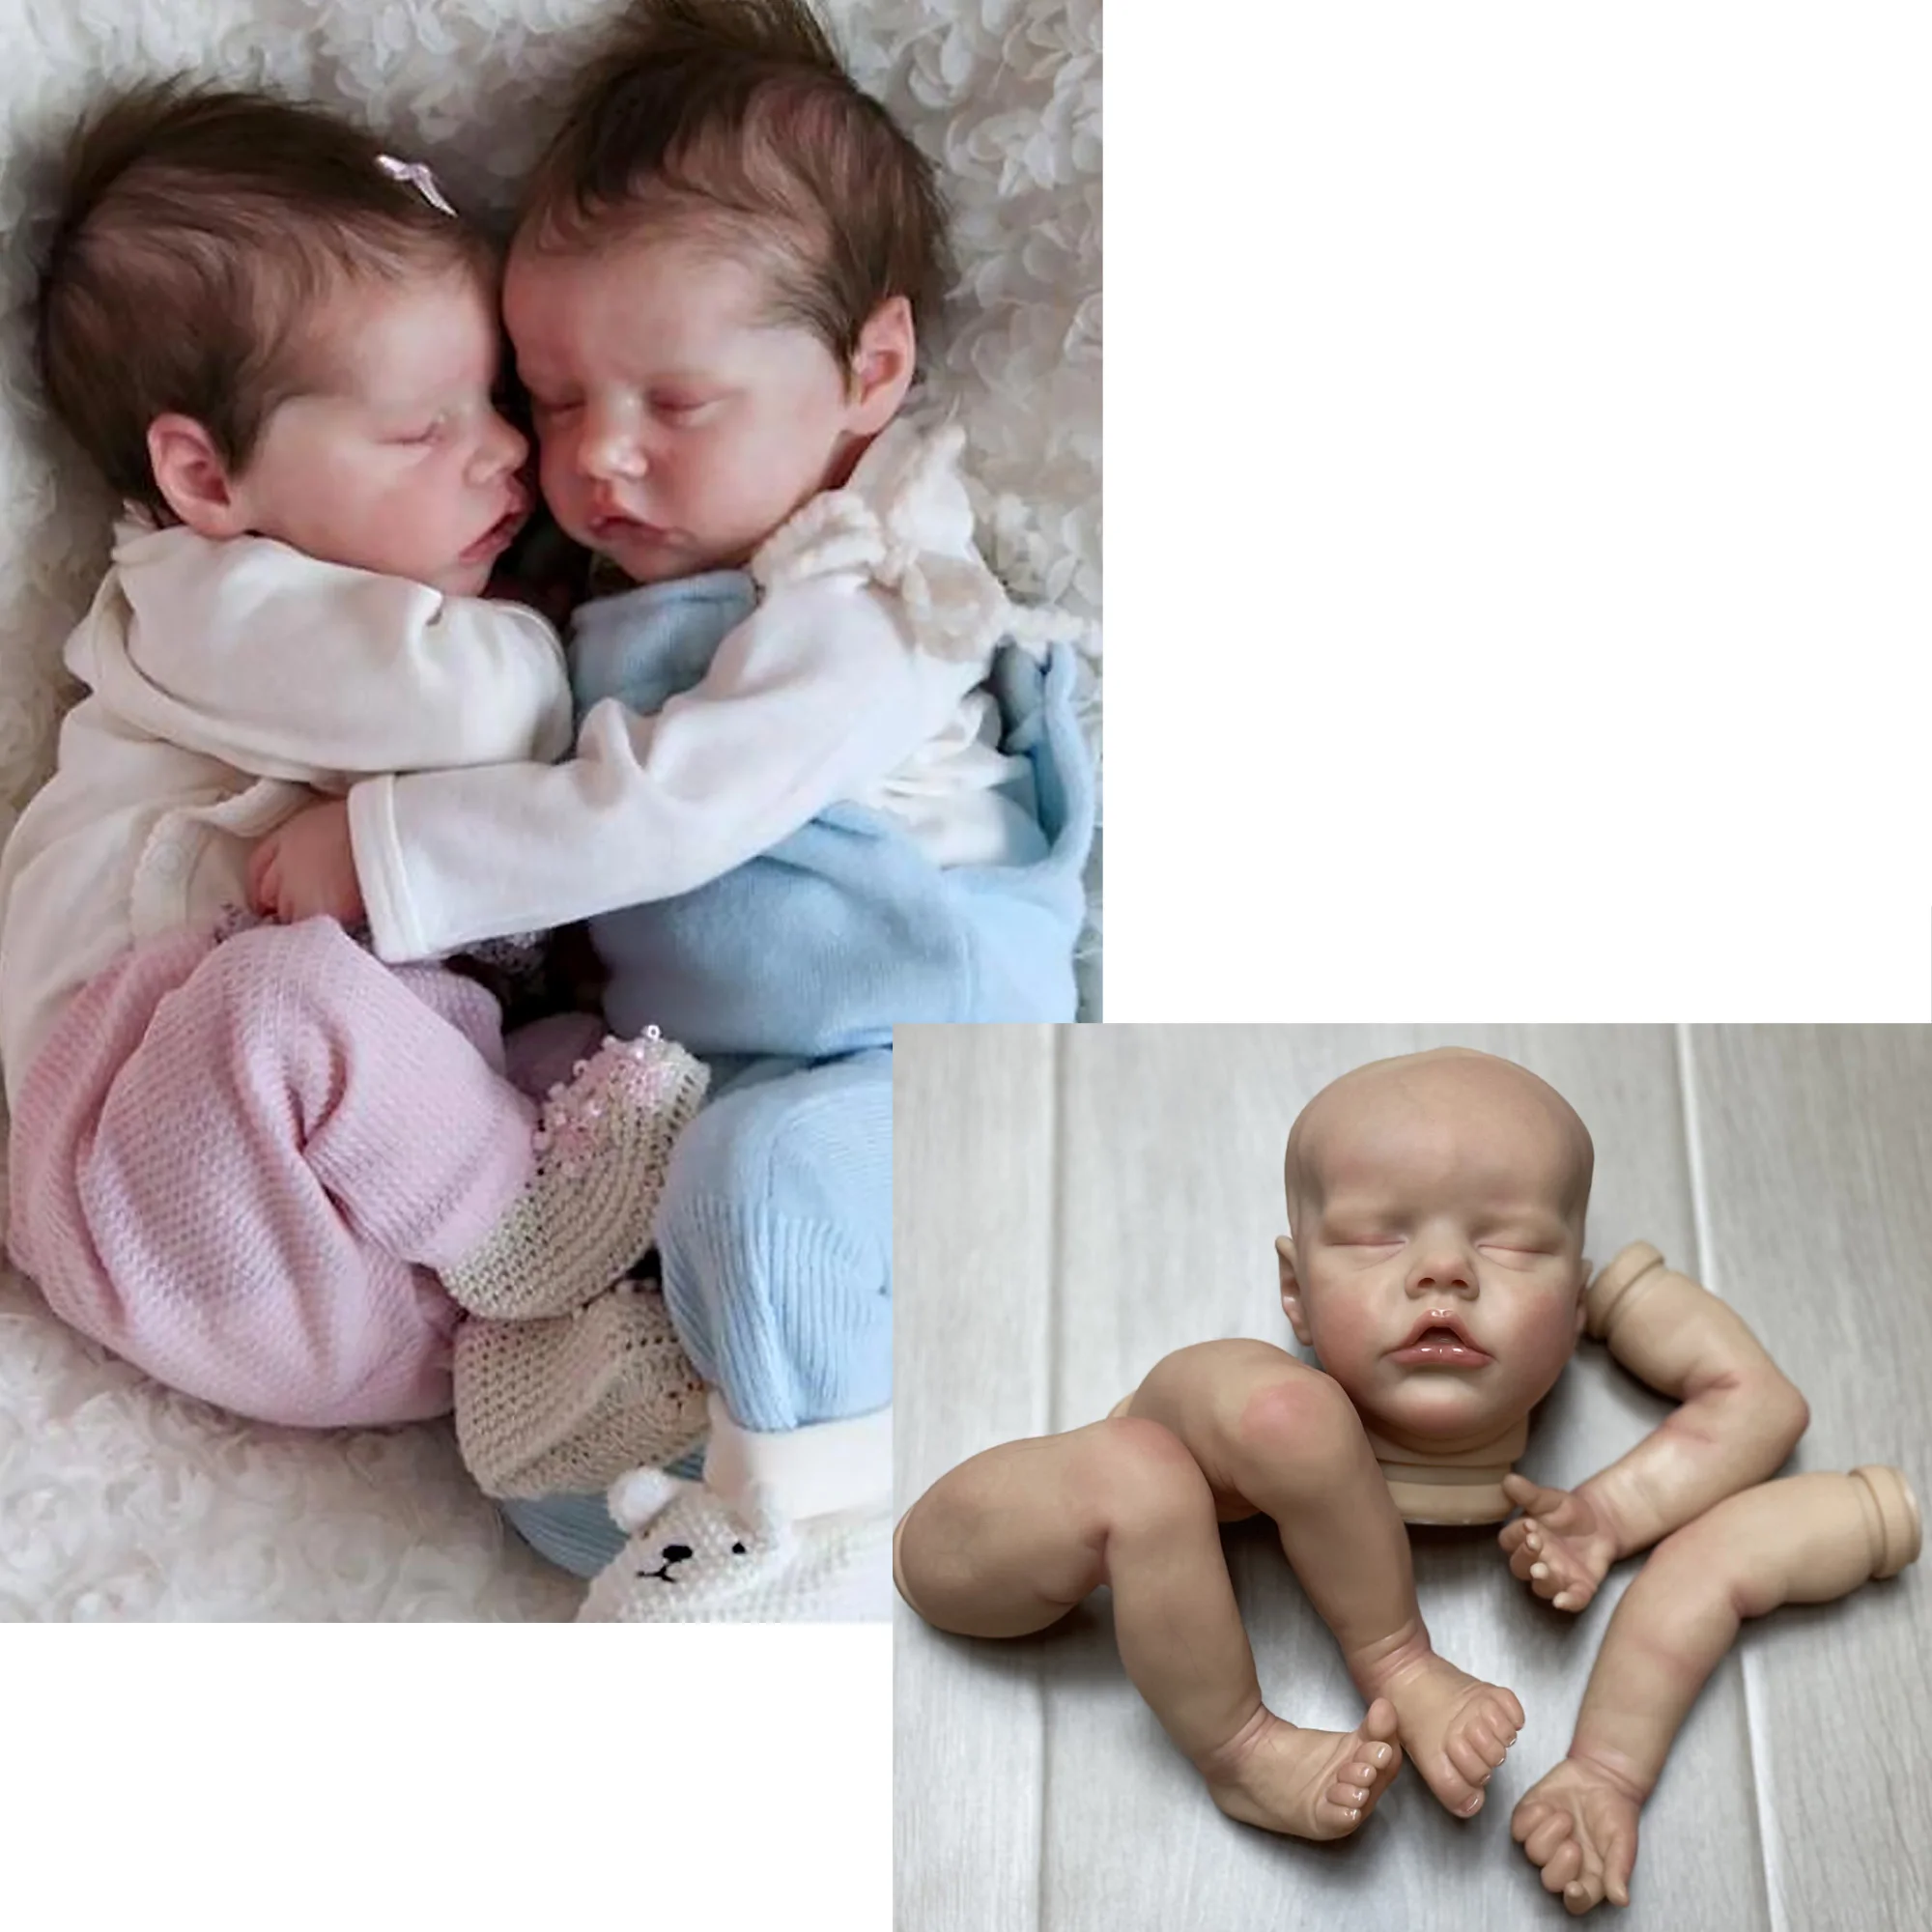 16 Inch Twins B and A Bebe Painted Reborn Kits Handmade Soft Vinyl Unassembly Reborn Doll With Cltoh Body